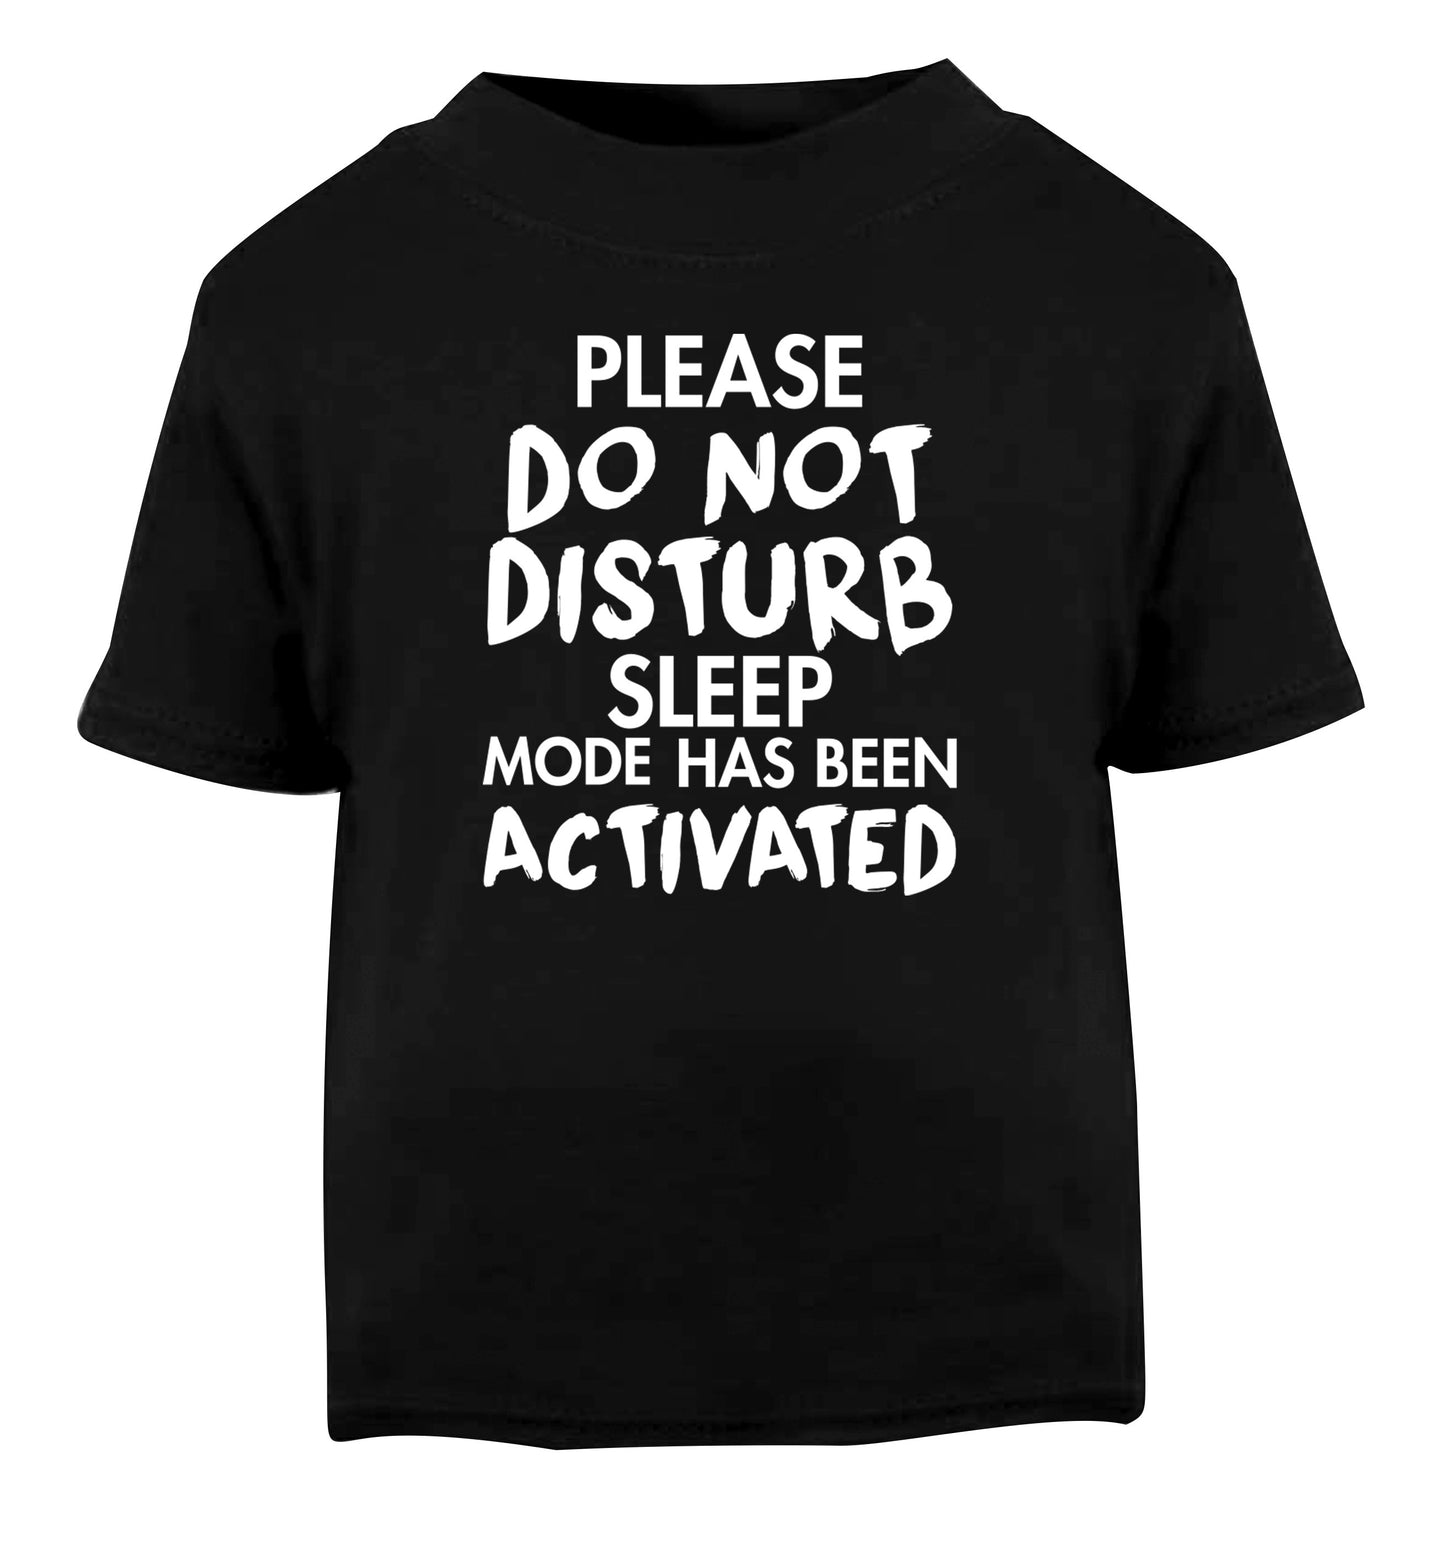 Please do not disturb sleeping mode has been activated Black Baby Toddler Tshirt 2 years